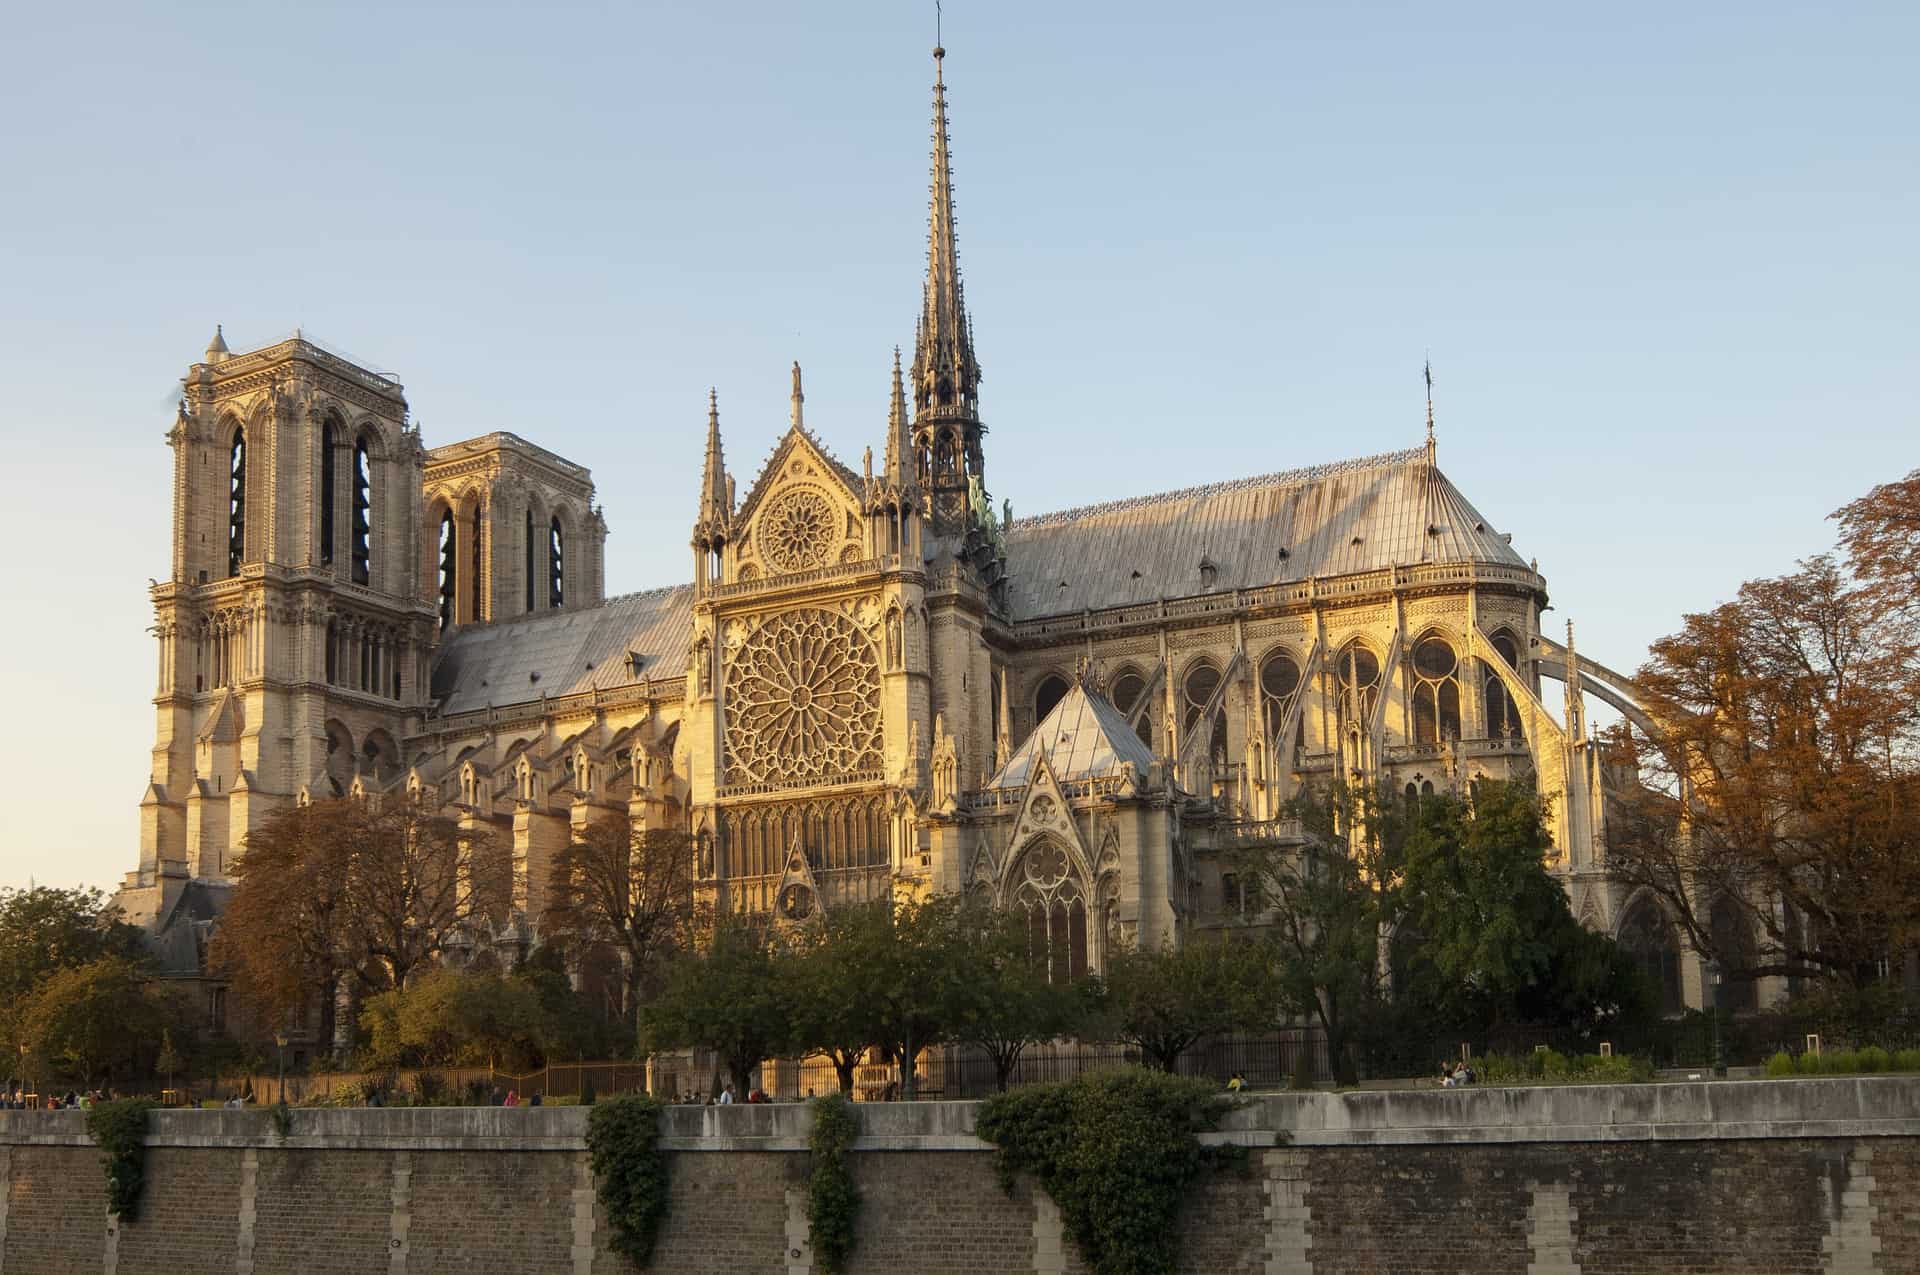 50 Notre Dame Cathedral Facts You Probably Never Knew About | Facts.net